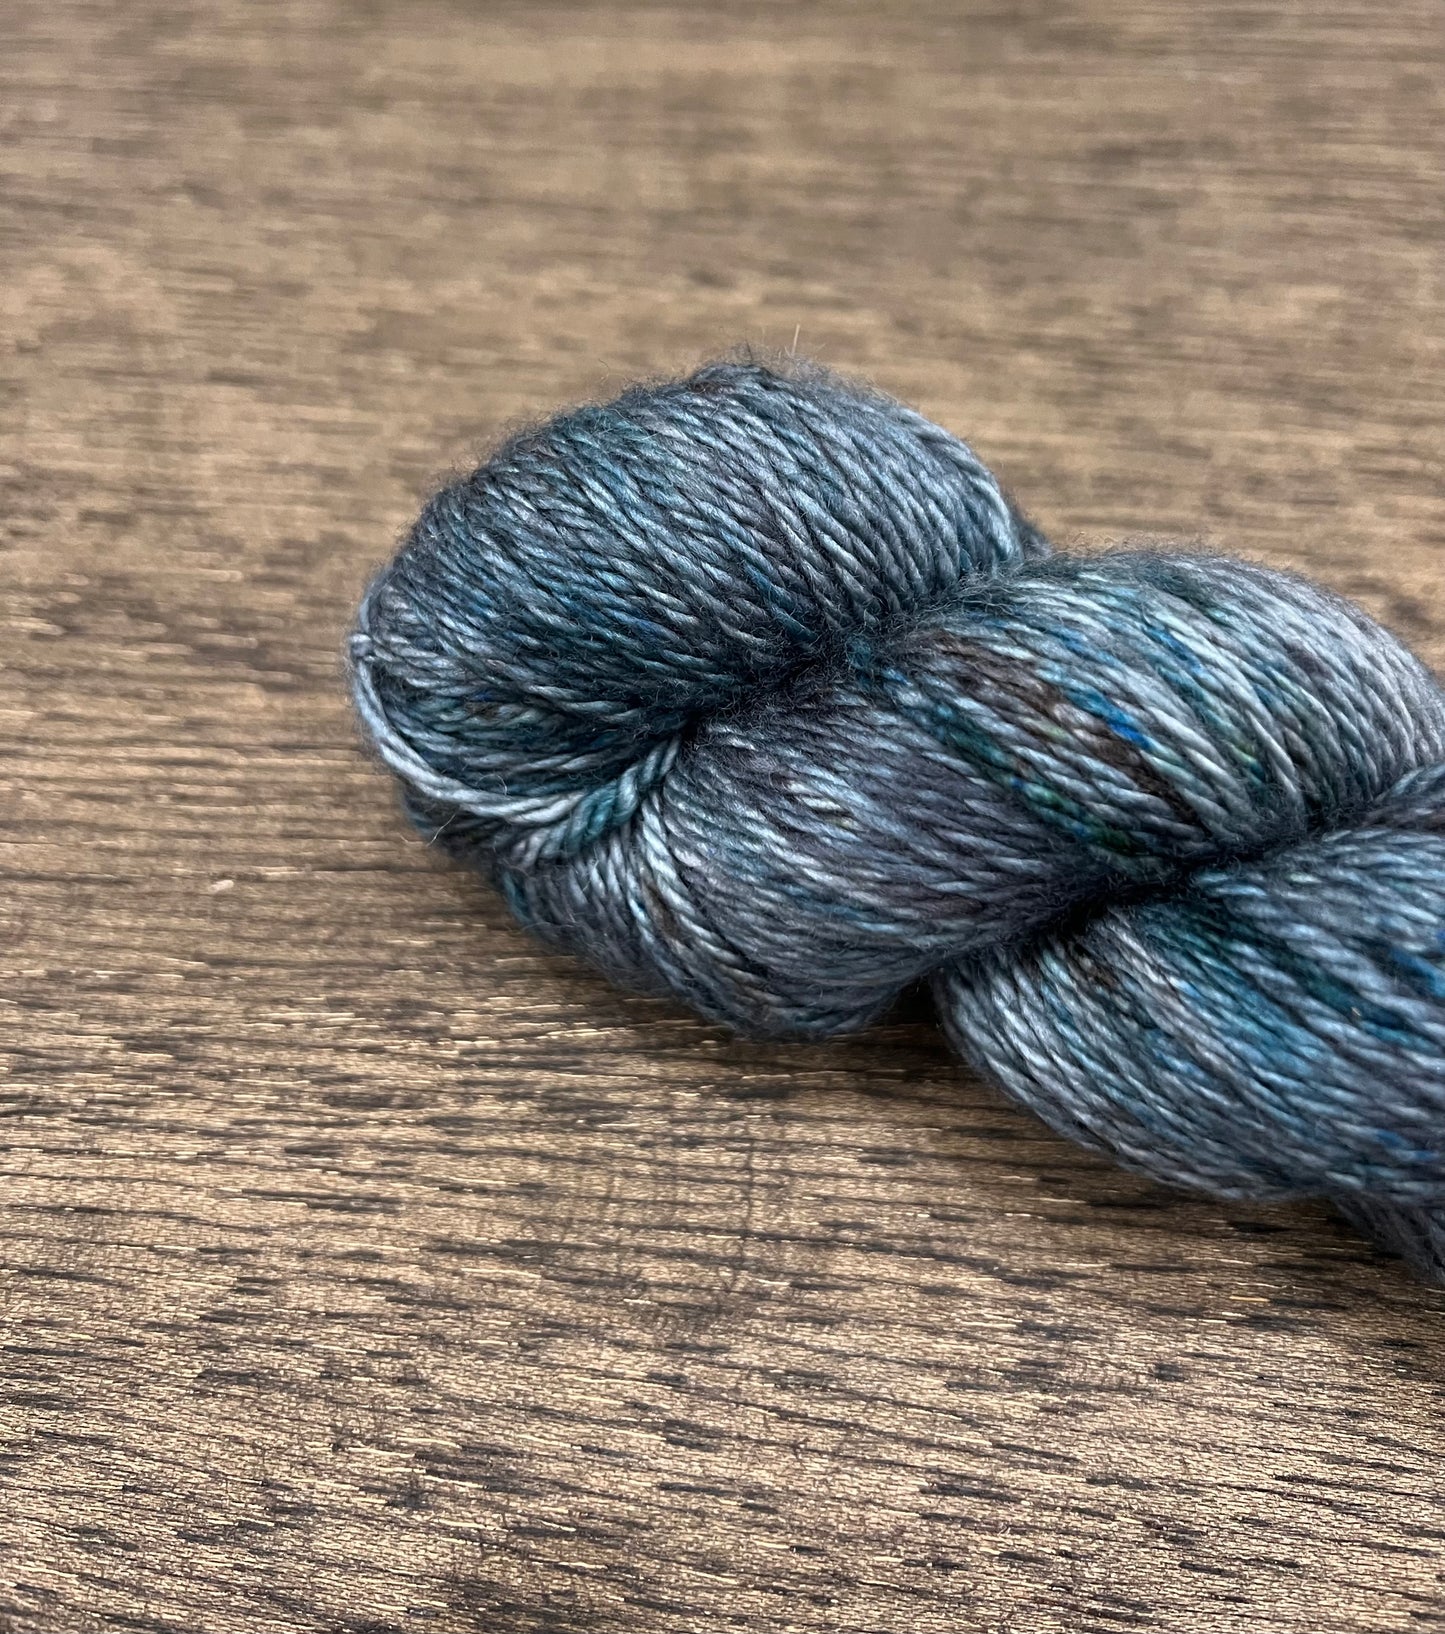 Monthly Yarn Subscription APRIL Mystery Skein, Yellowstone Inspired